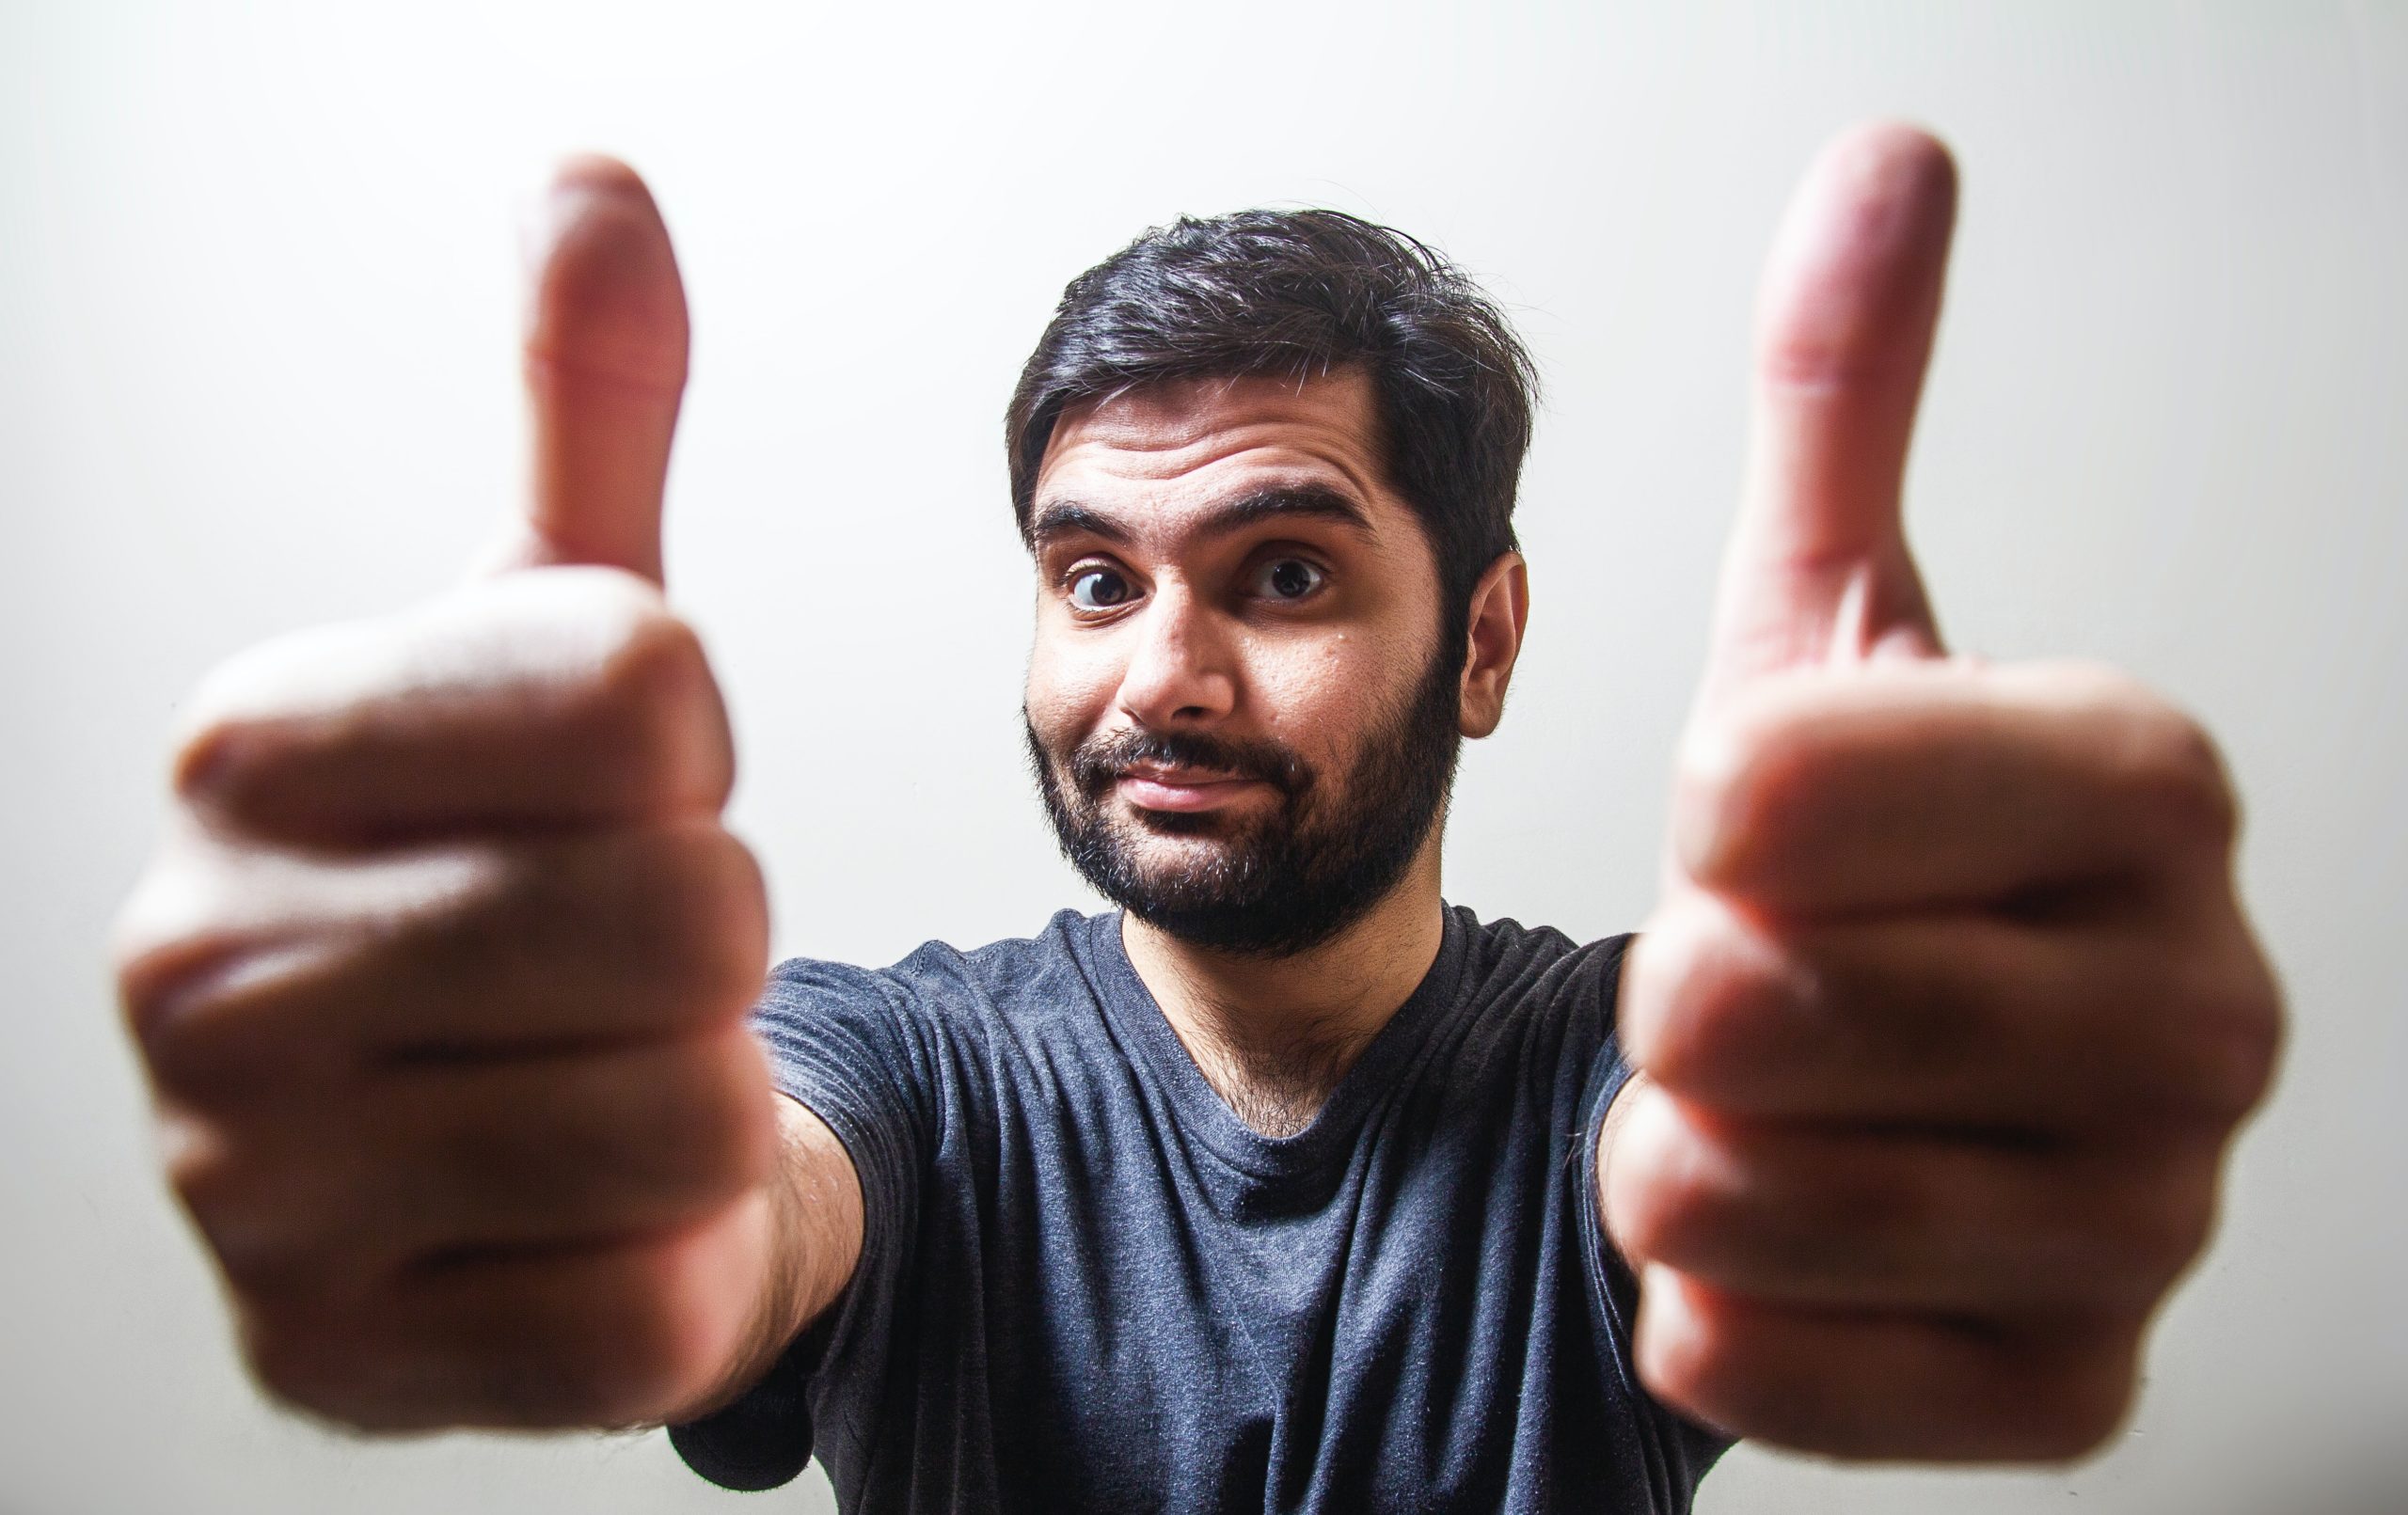 A man makes a thumbs up sign with both hands.